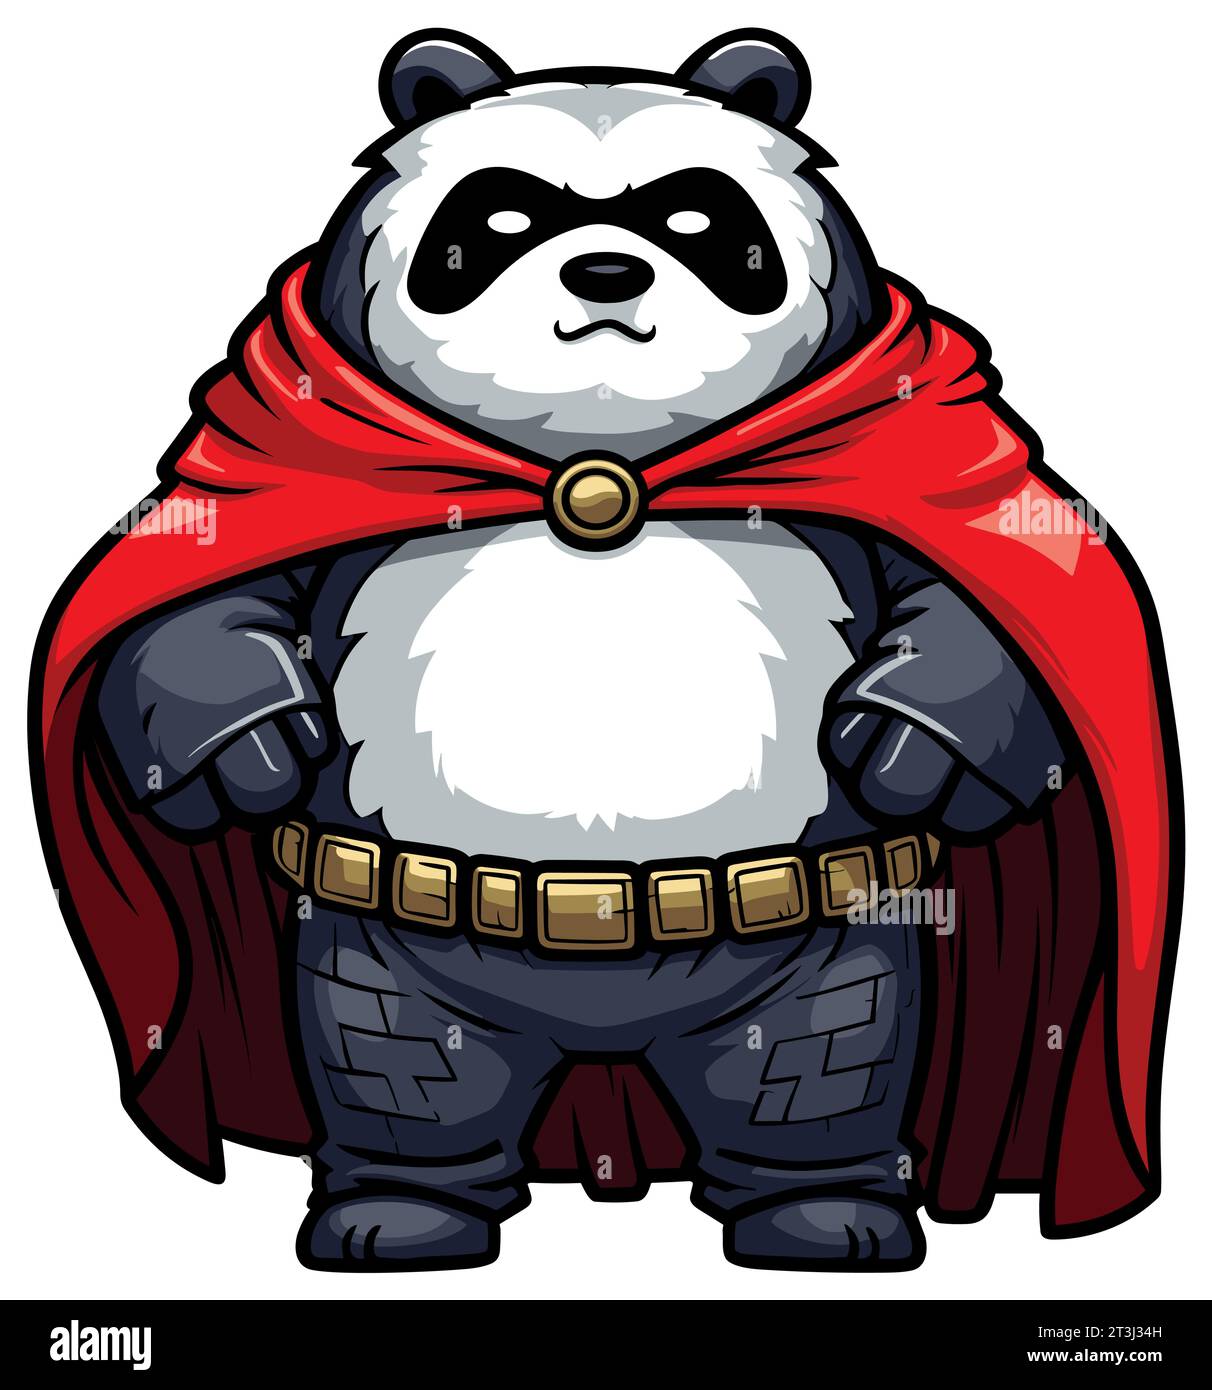 Illustrative portrait of powerful panda superhero wearing red cape and looking at camera against white background Stock Vector